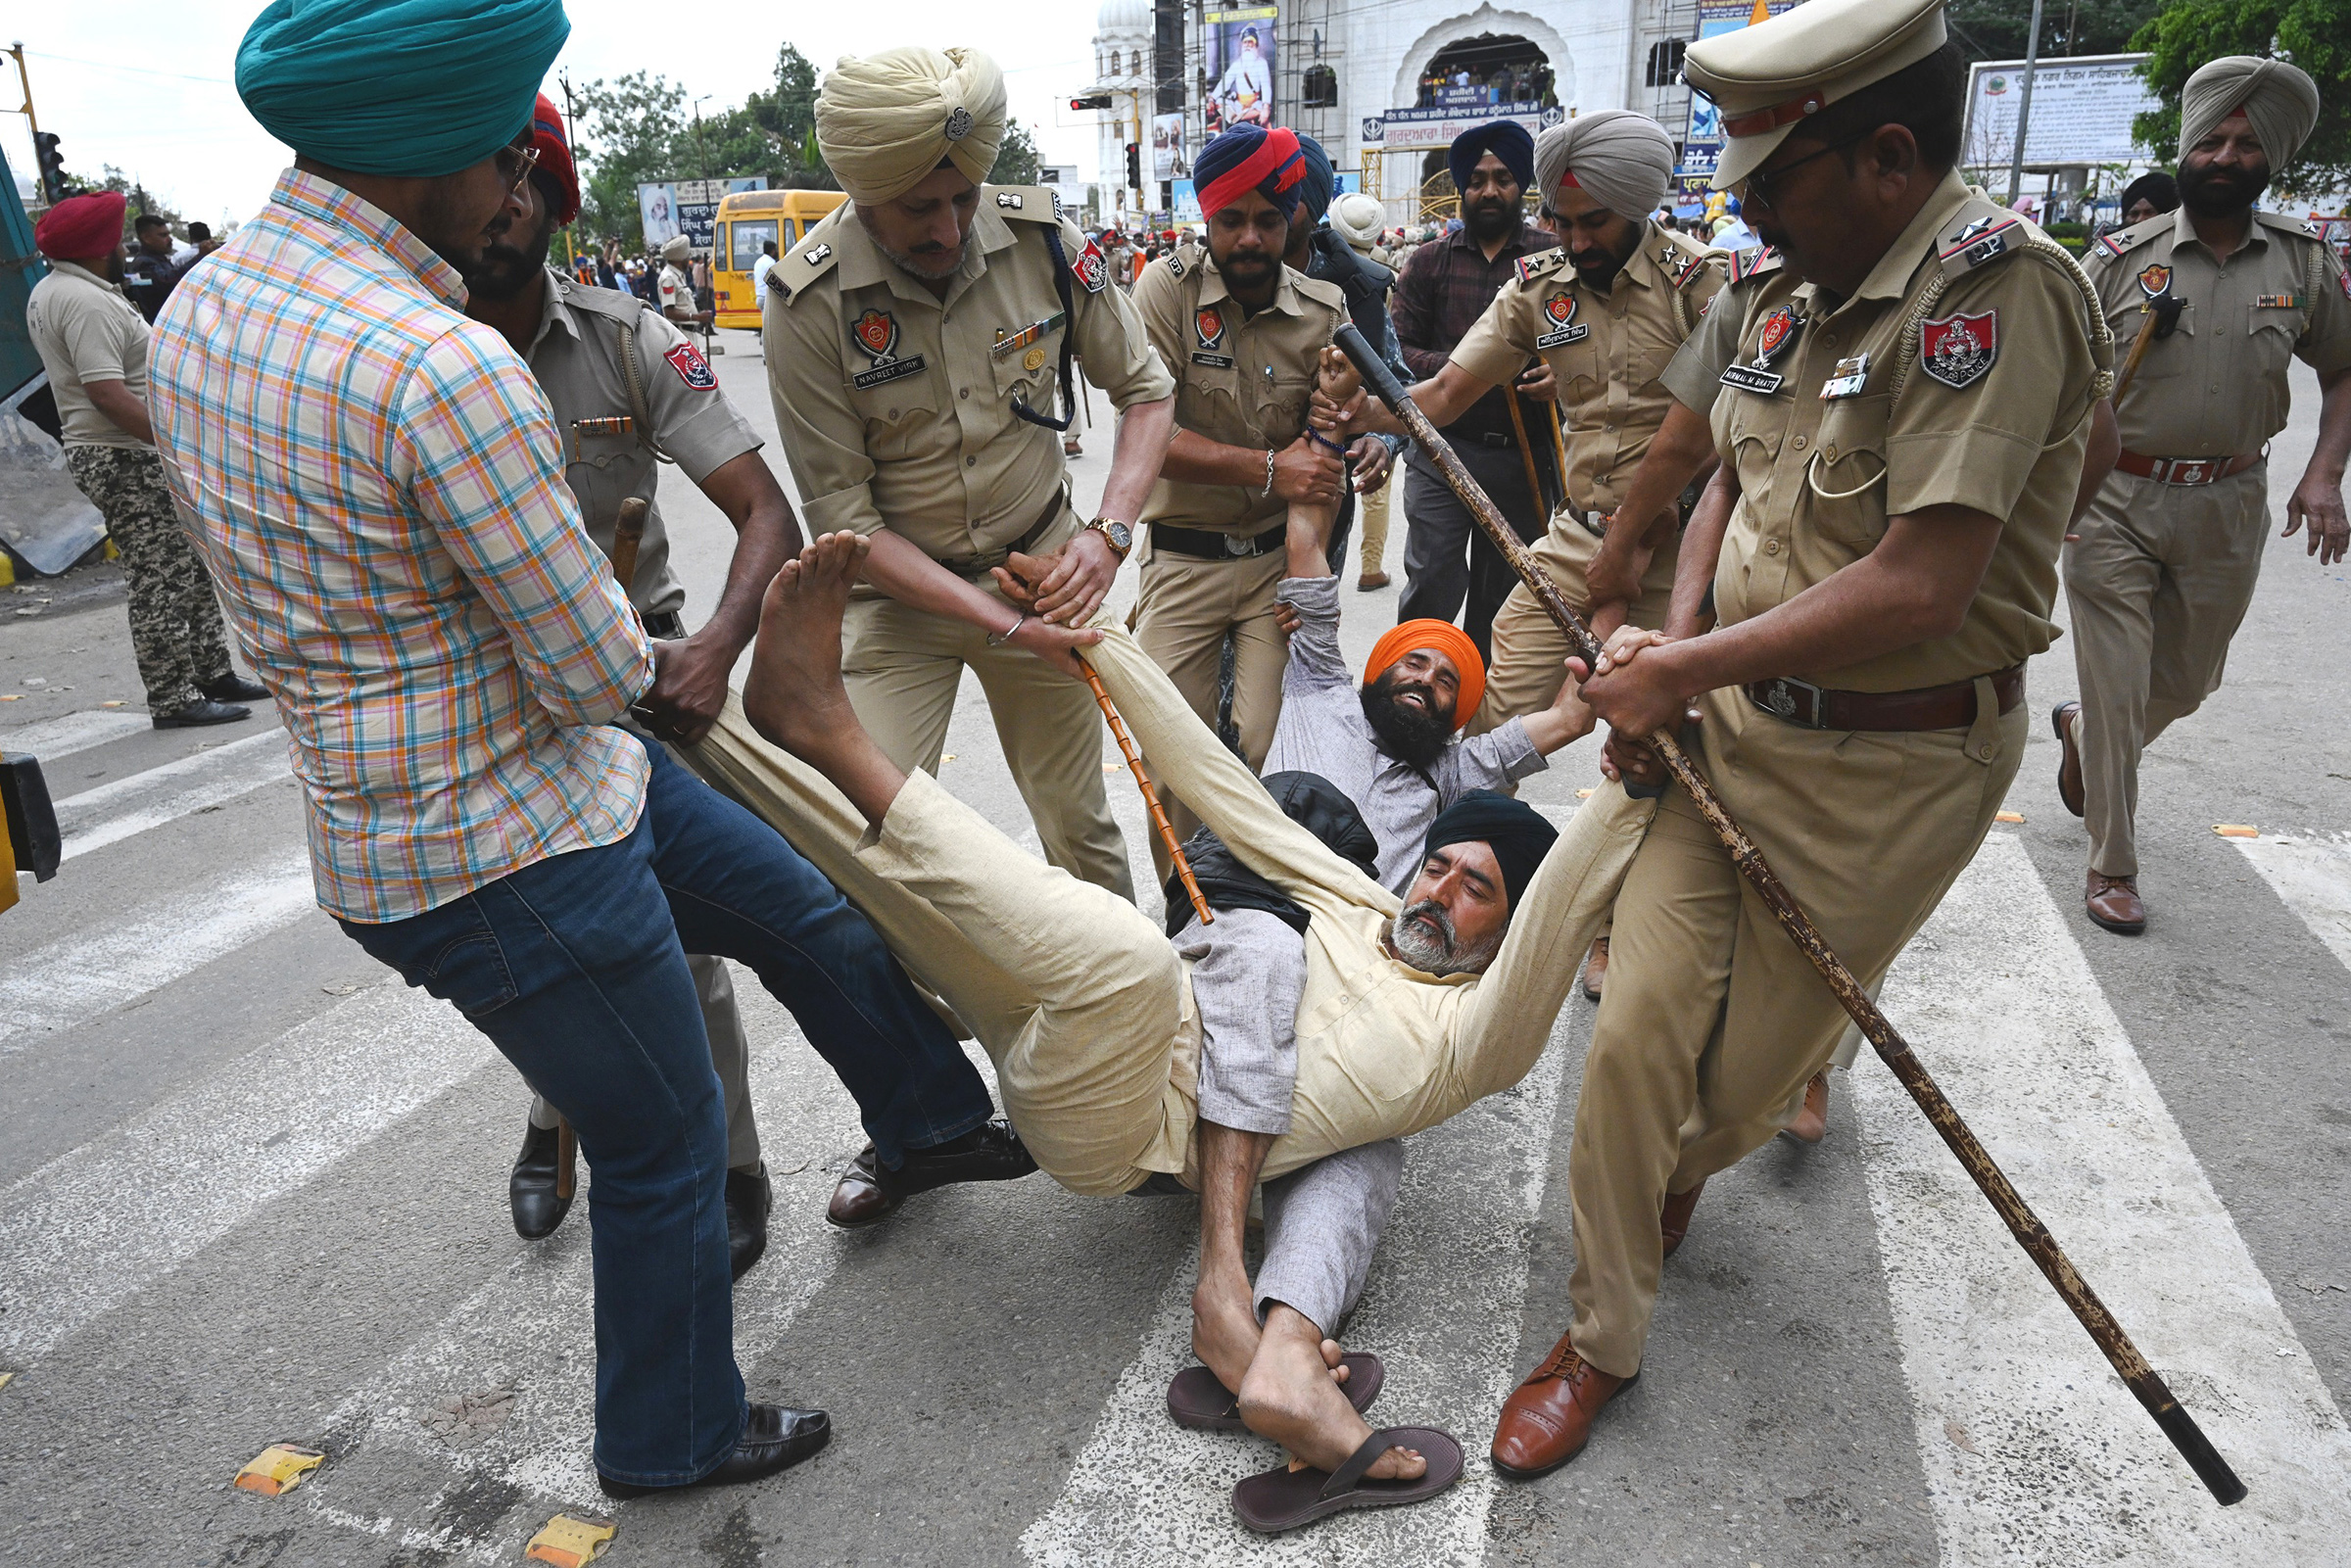 Punjab police forcefully remove supporters protesting the police action against Amritpal Singh in Mohali, India, on March 21. (Sanjeev Sharma—Hindustan Times/Getty Images)